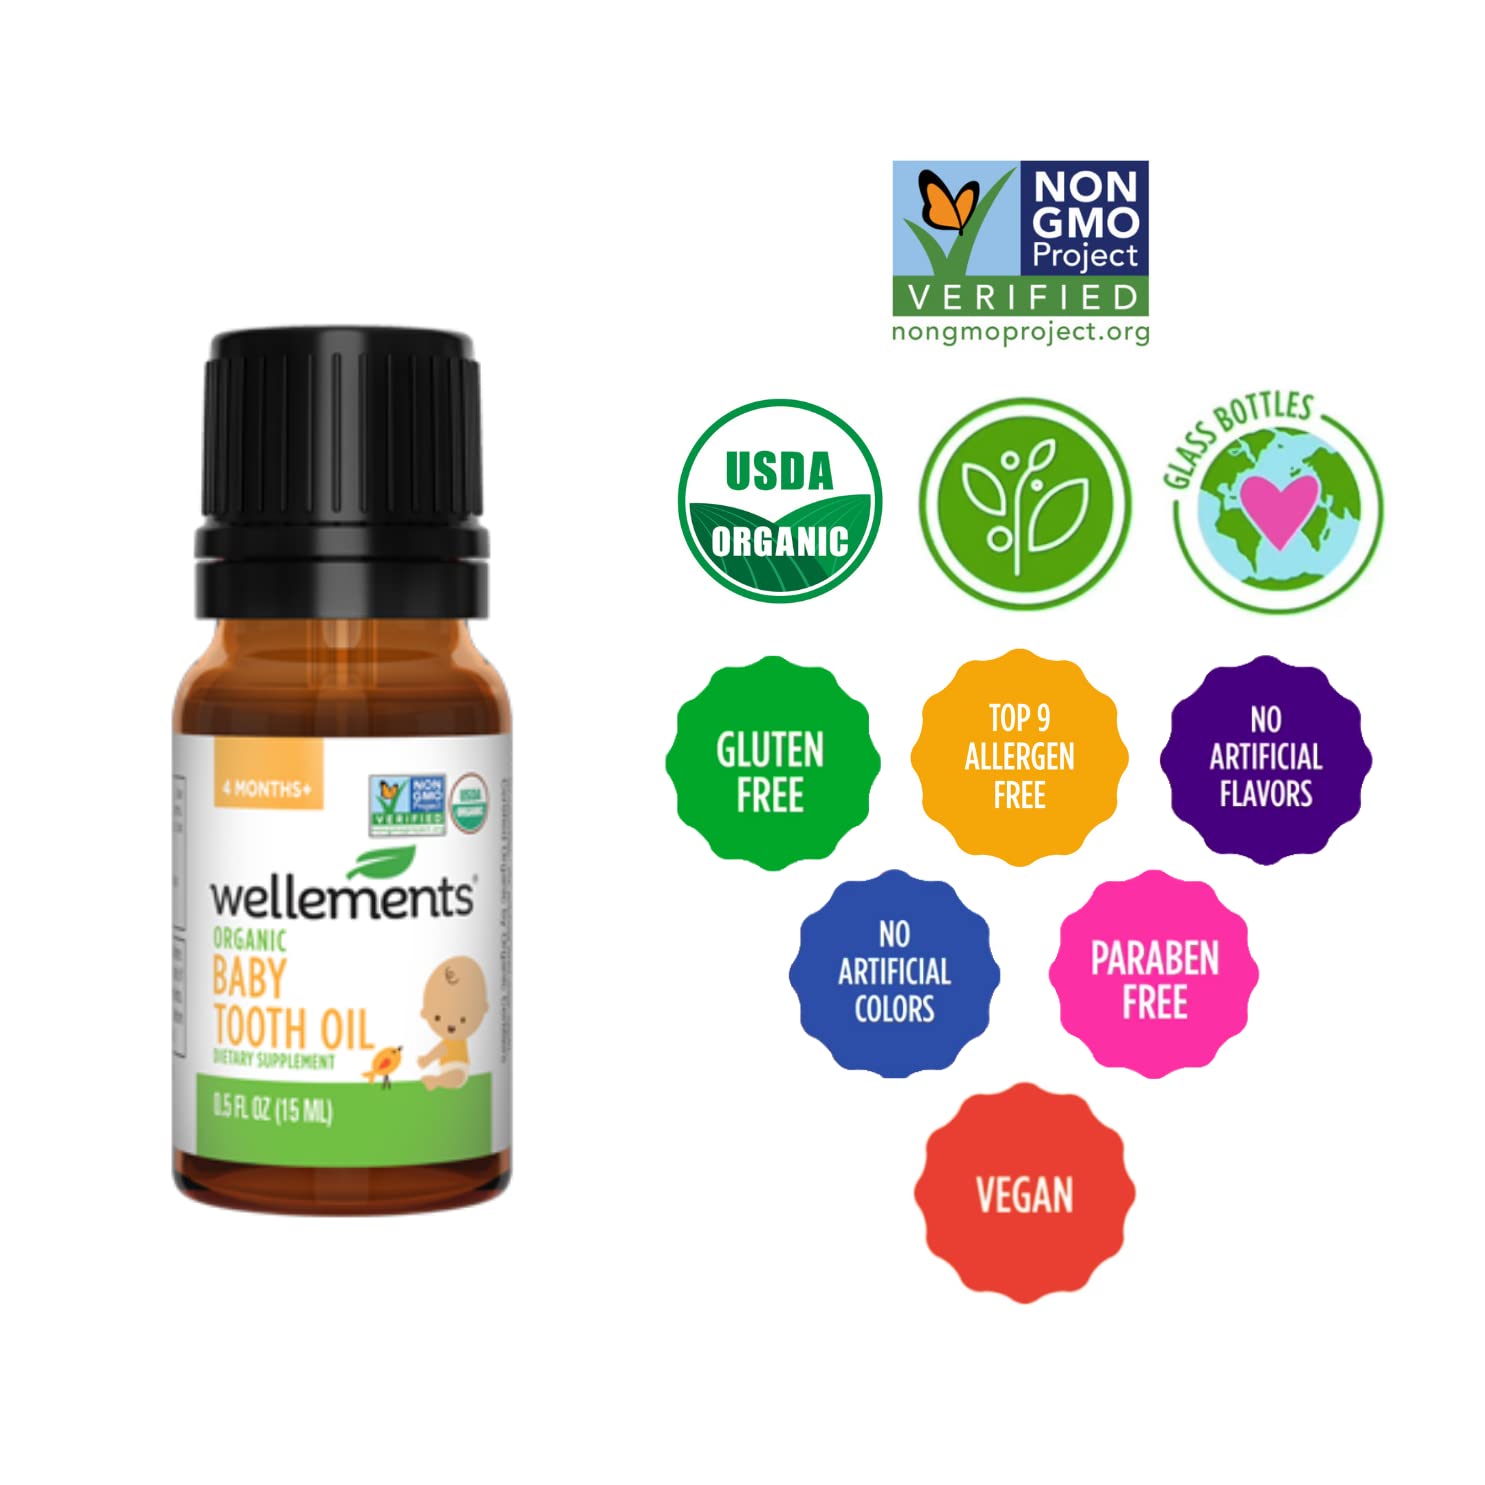 Wellements Organic Baby Tooth Oil for Teething, Free from Dyes, Parabens, Preservatives, 0.5 Fl oz